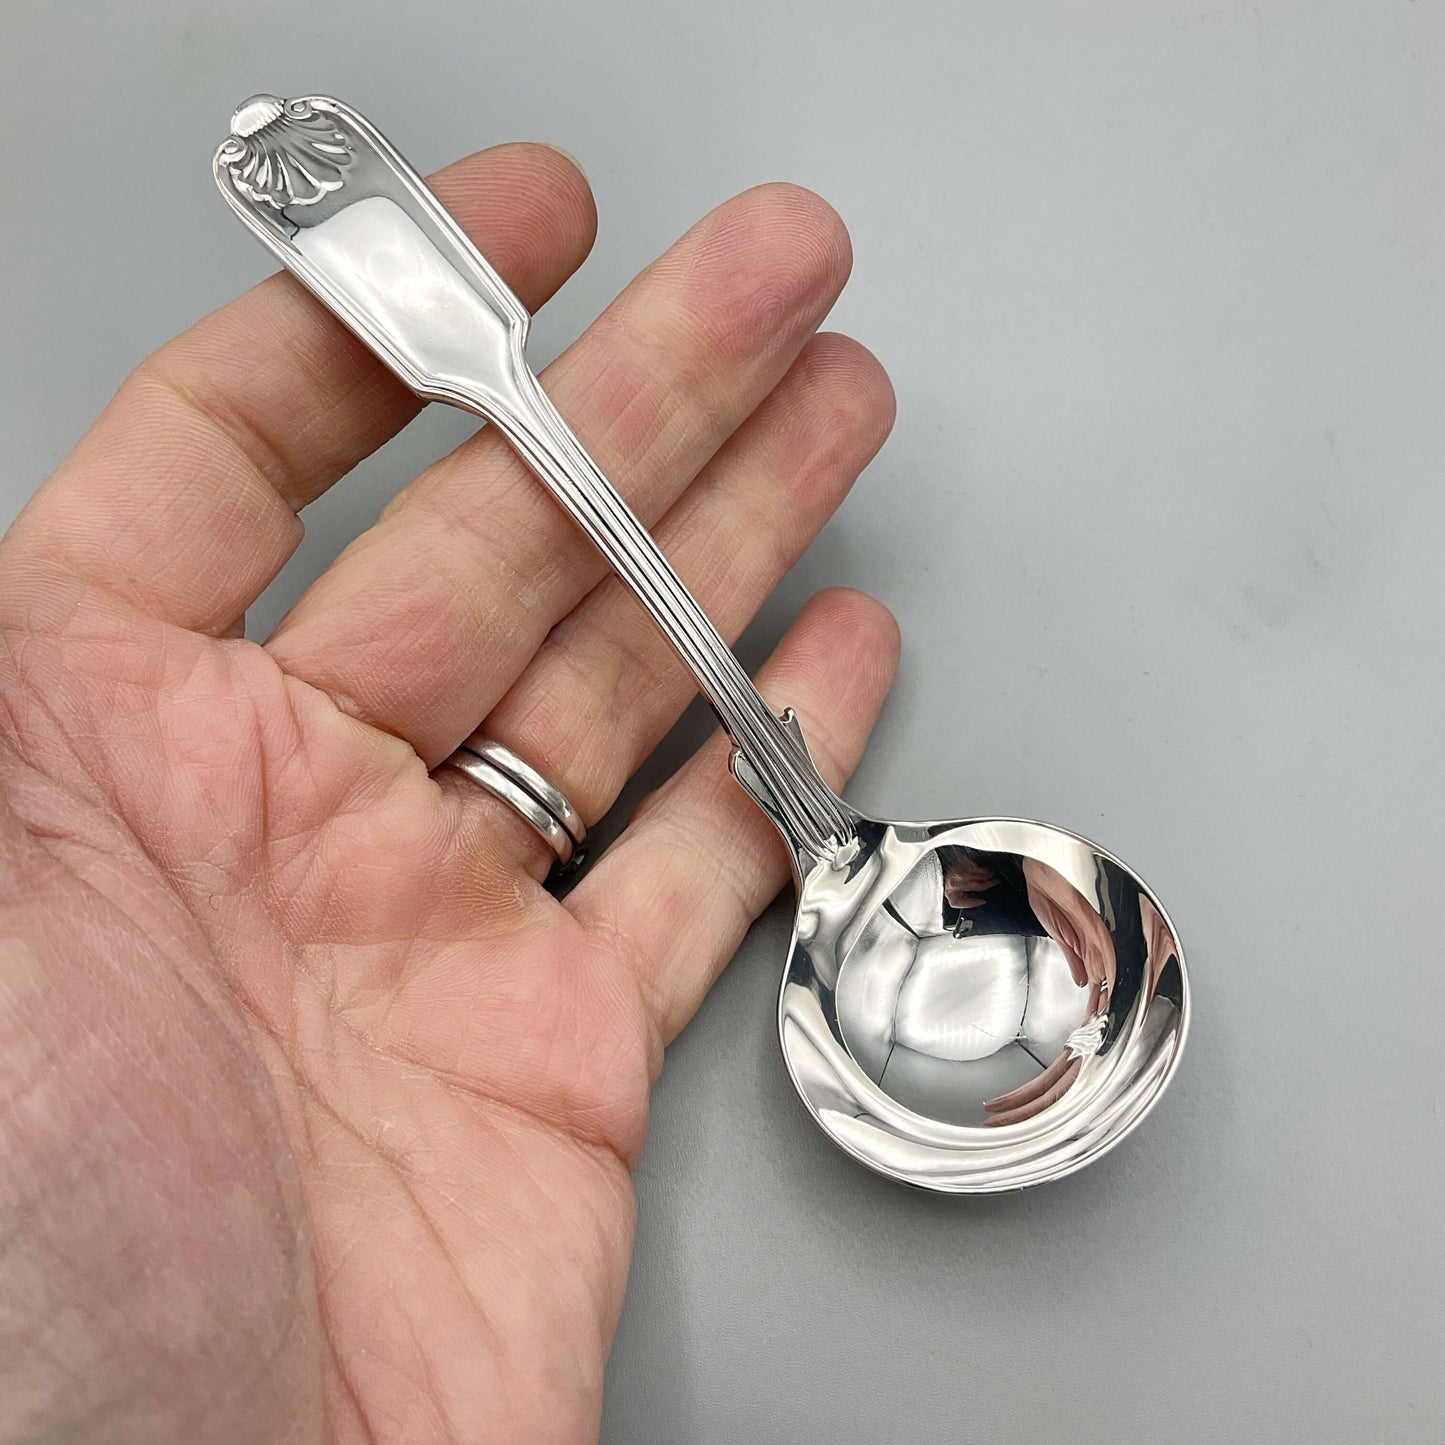 Small Silver Plated Sauce Ladle